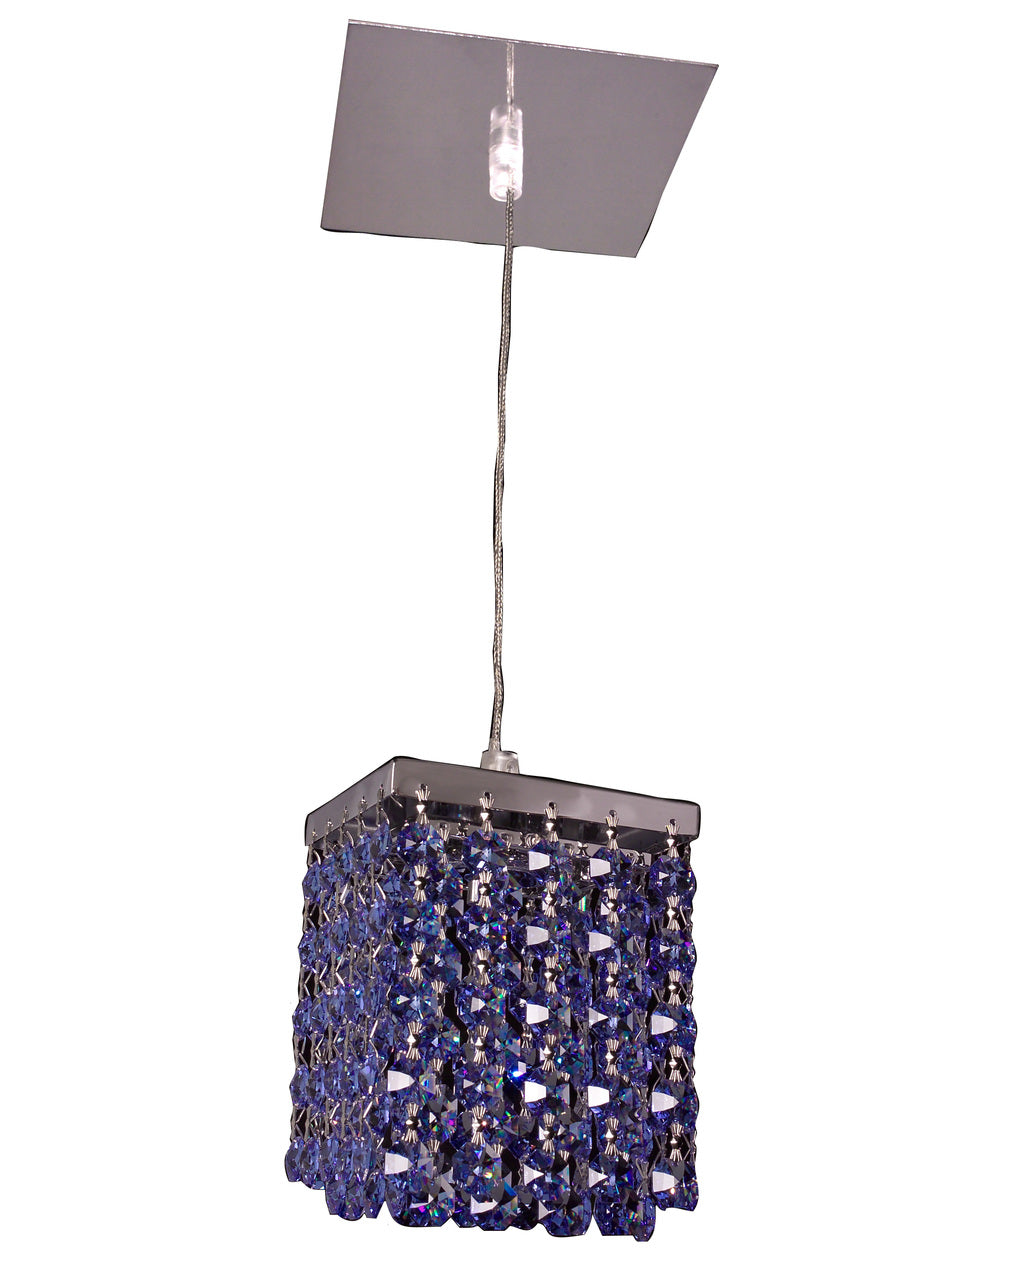 Classic Lighting 16101 SMS Bedazzle Crystal Pendant in Chrome